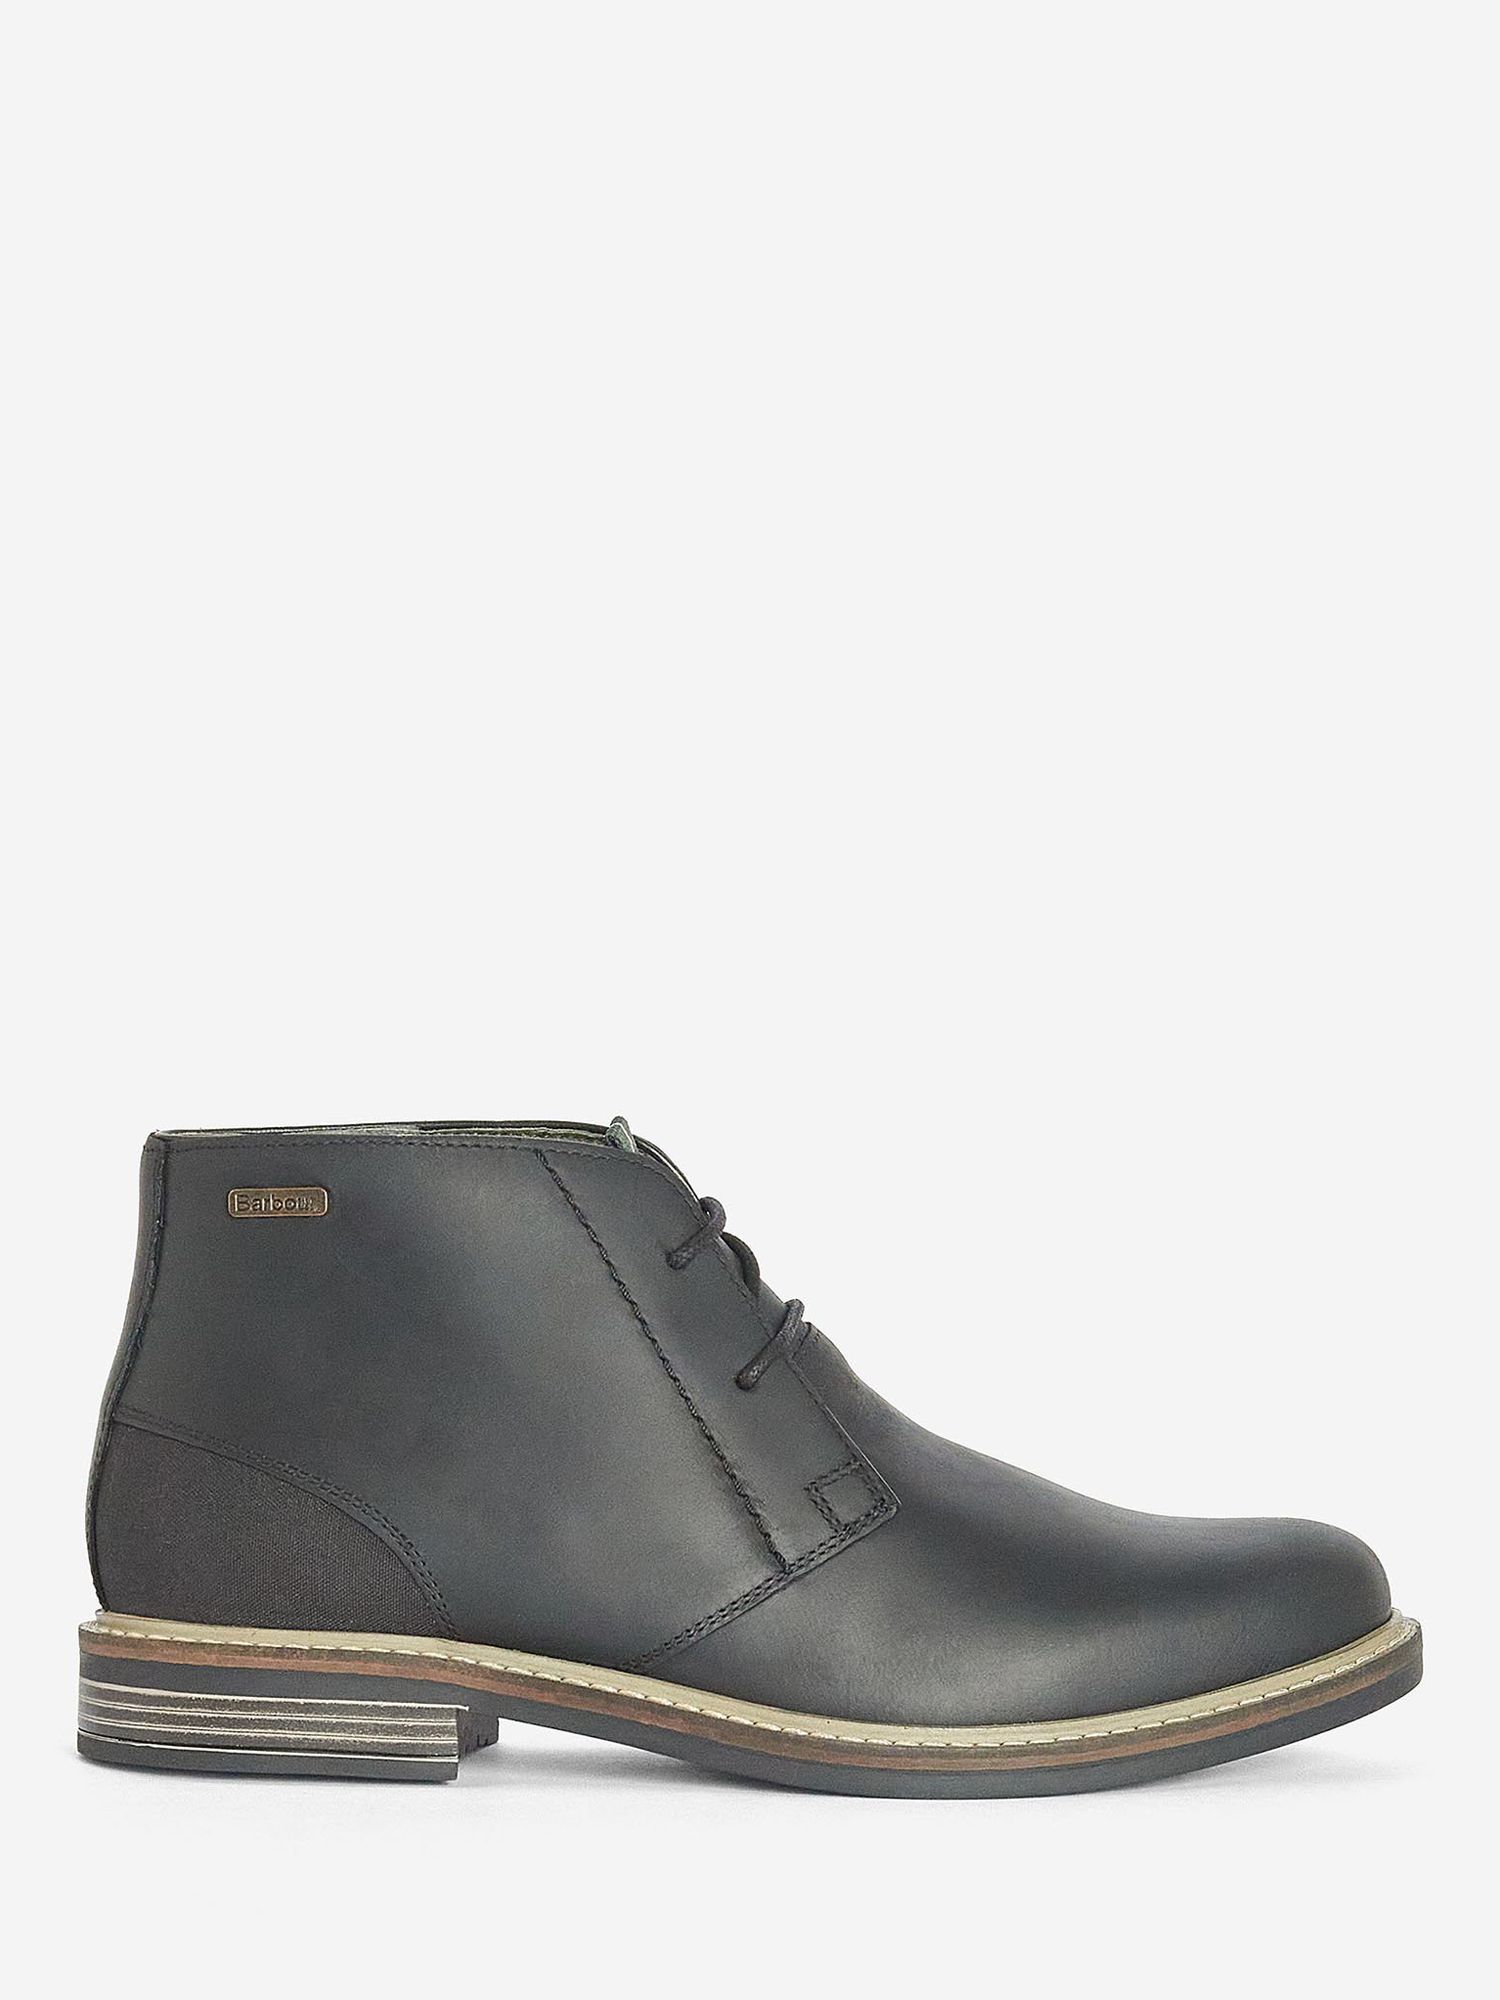 Lightweight Leather Boots | John Lewis & Partners